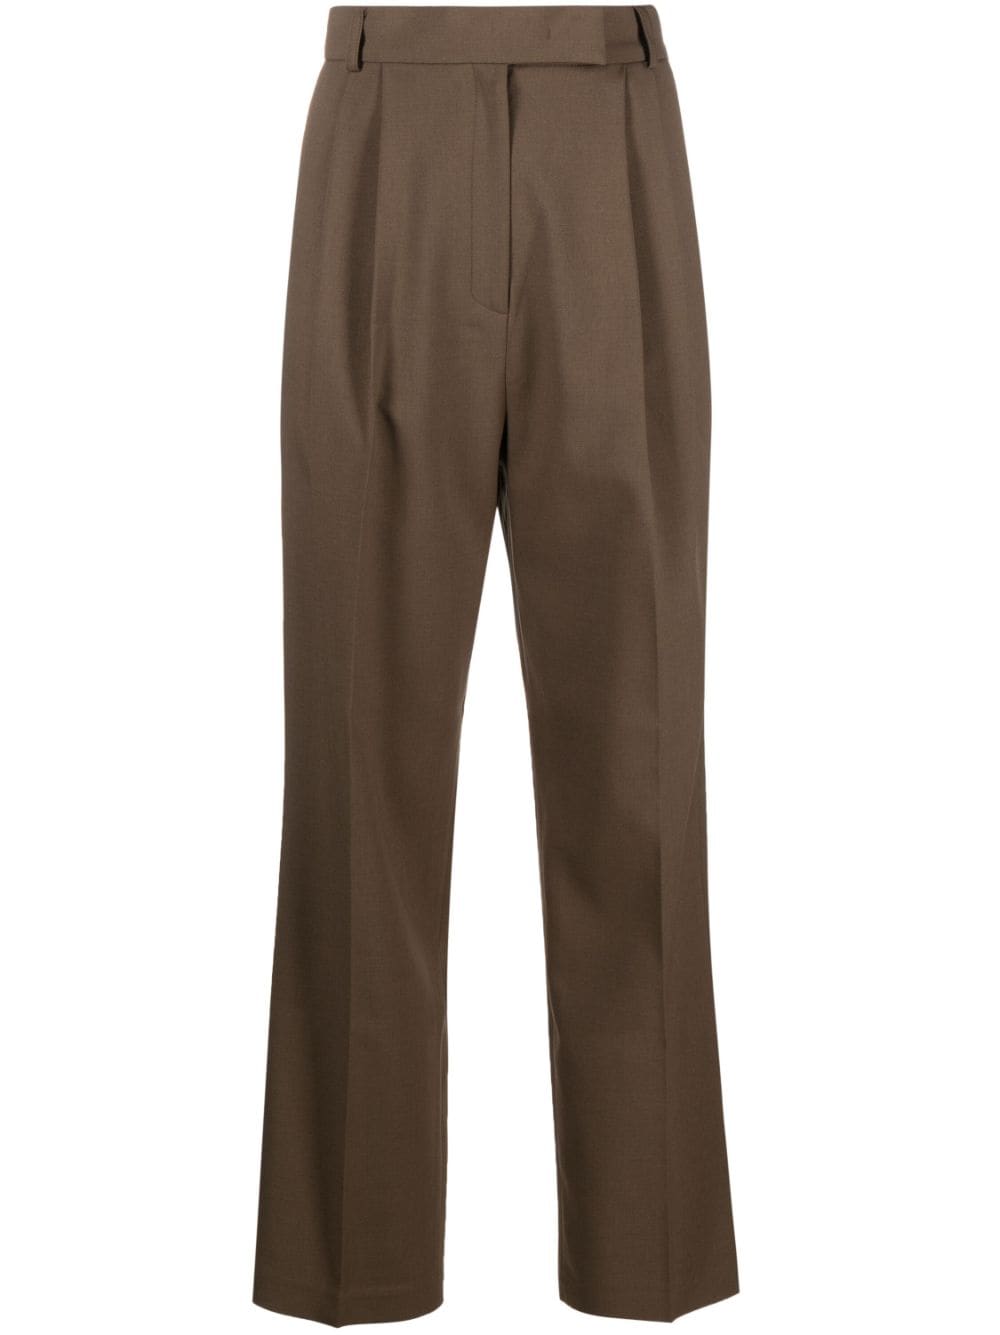 The Frankie Shop Bea wide-leg tailored trousers - Brown